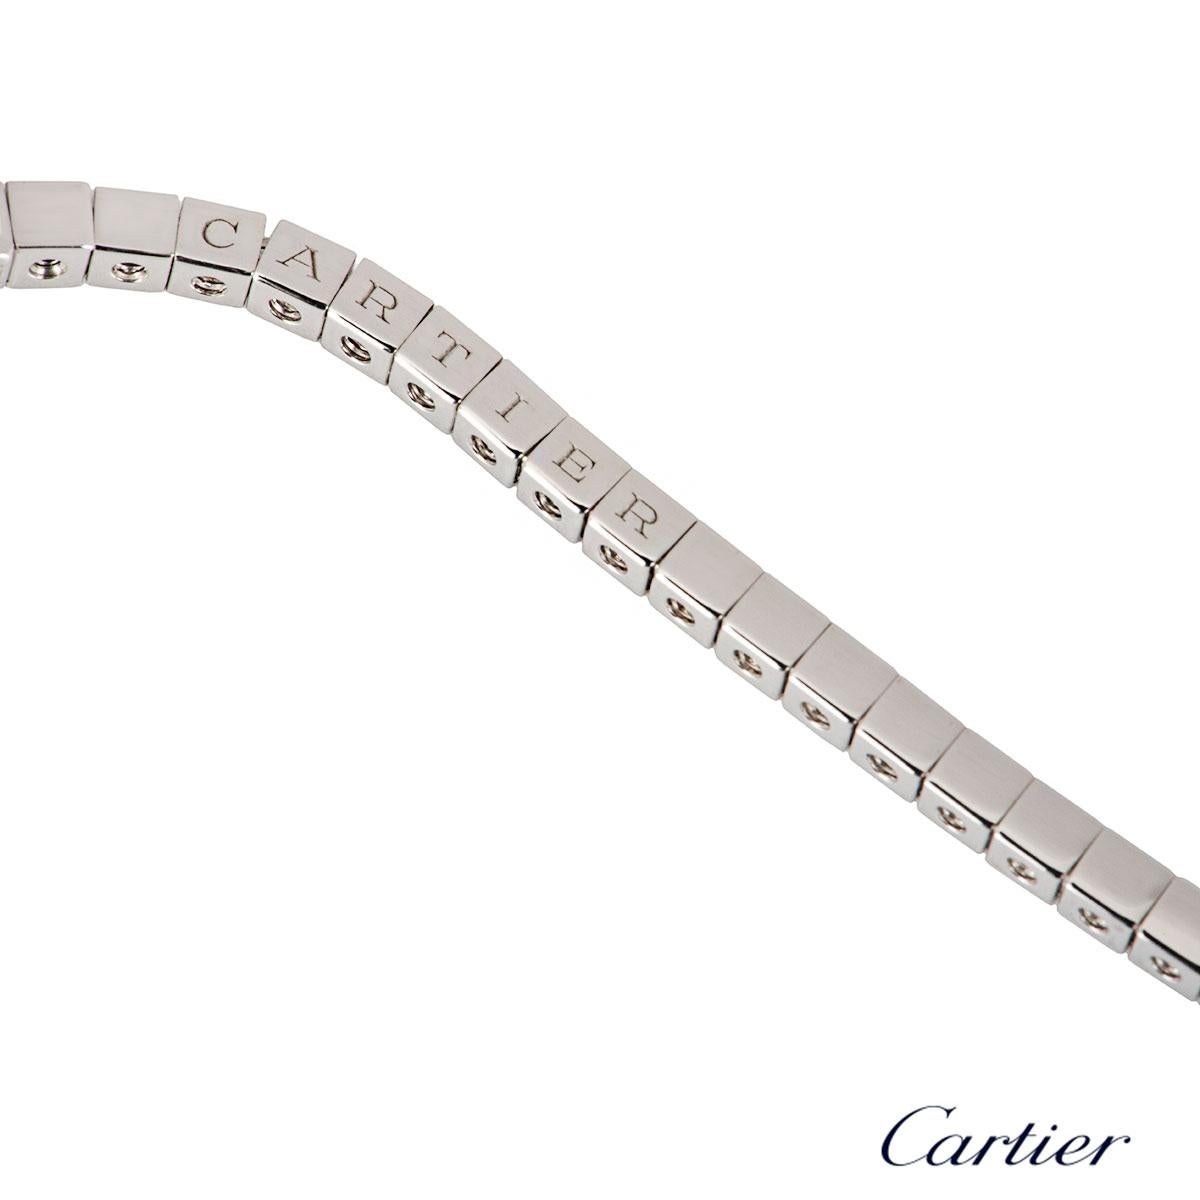 A beautiful 18k white gold bracelet by Cartier from the Lanières collection. The bracelet is comprised of 56 square flexi links. The bracelet will fit wrists up 15cm and has a tongue clasp with a figure of eight on the side for added security. The